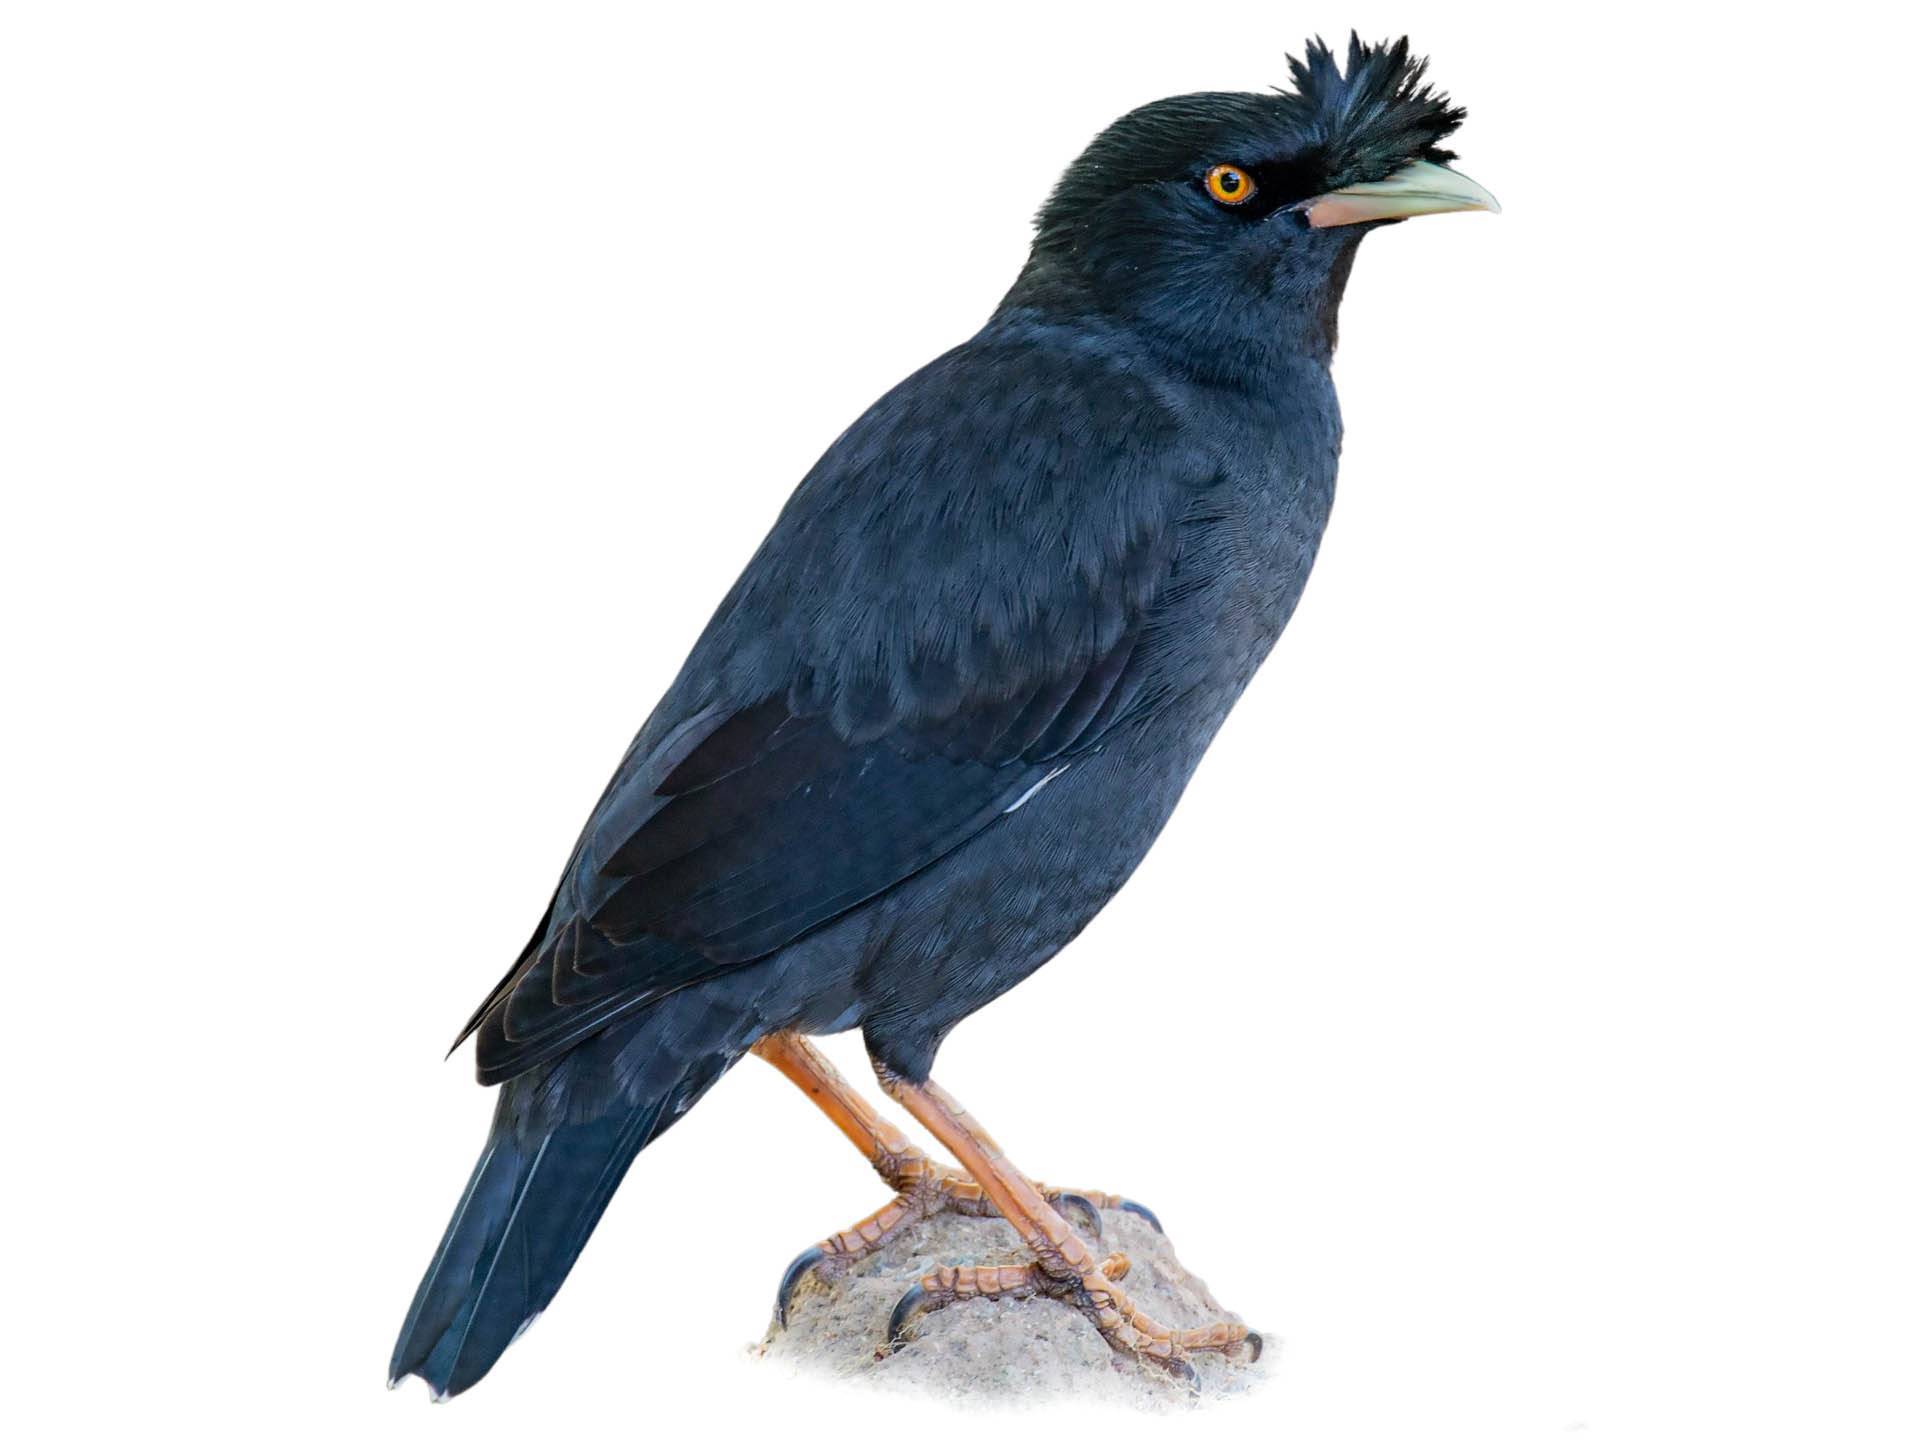 A photo of a Crested Myna (Acridotheres cristatellus)